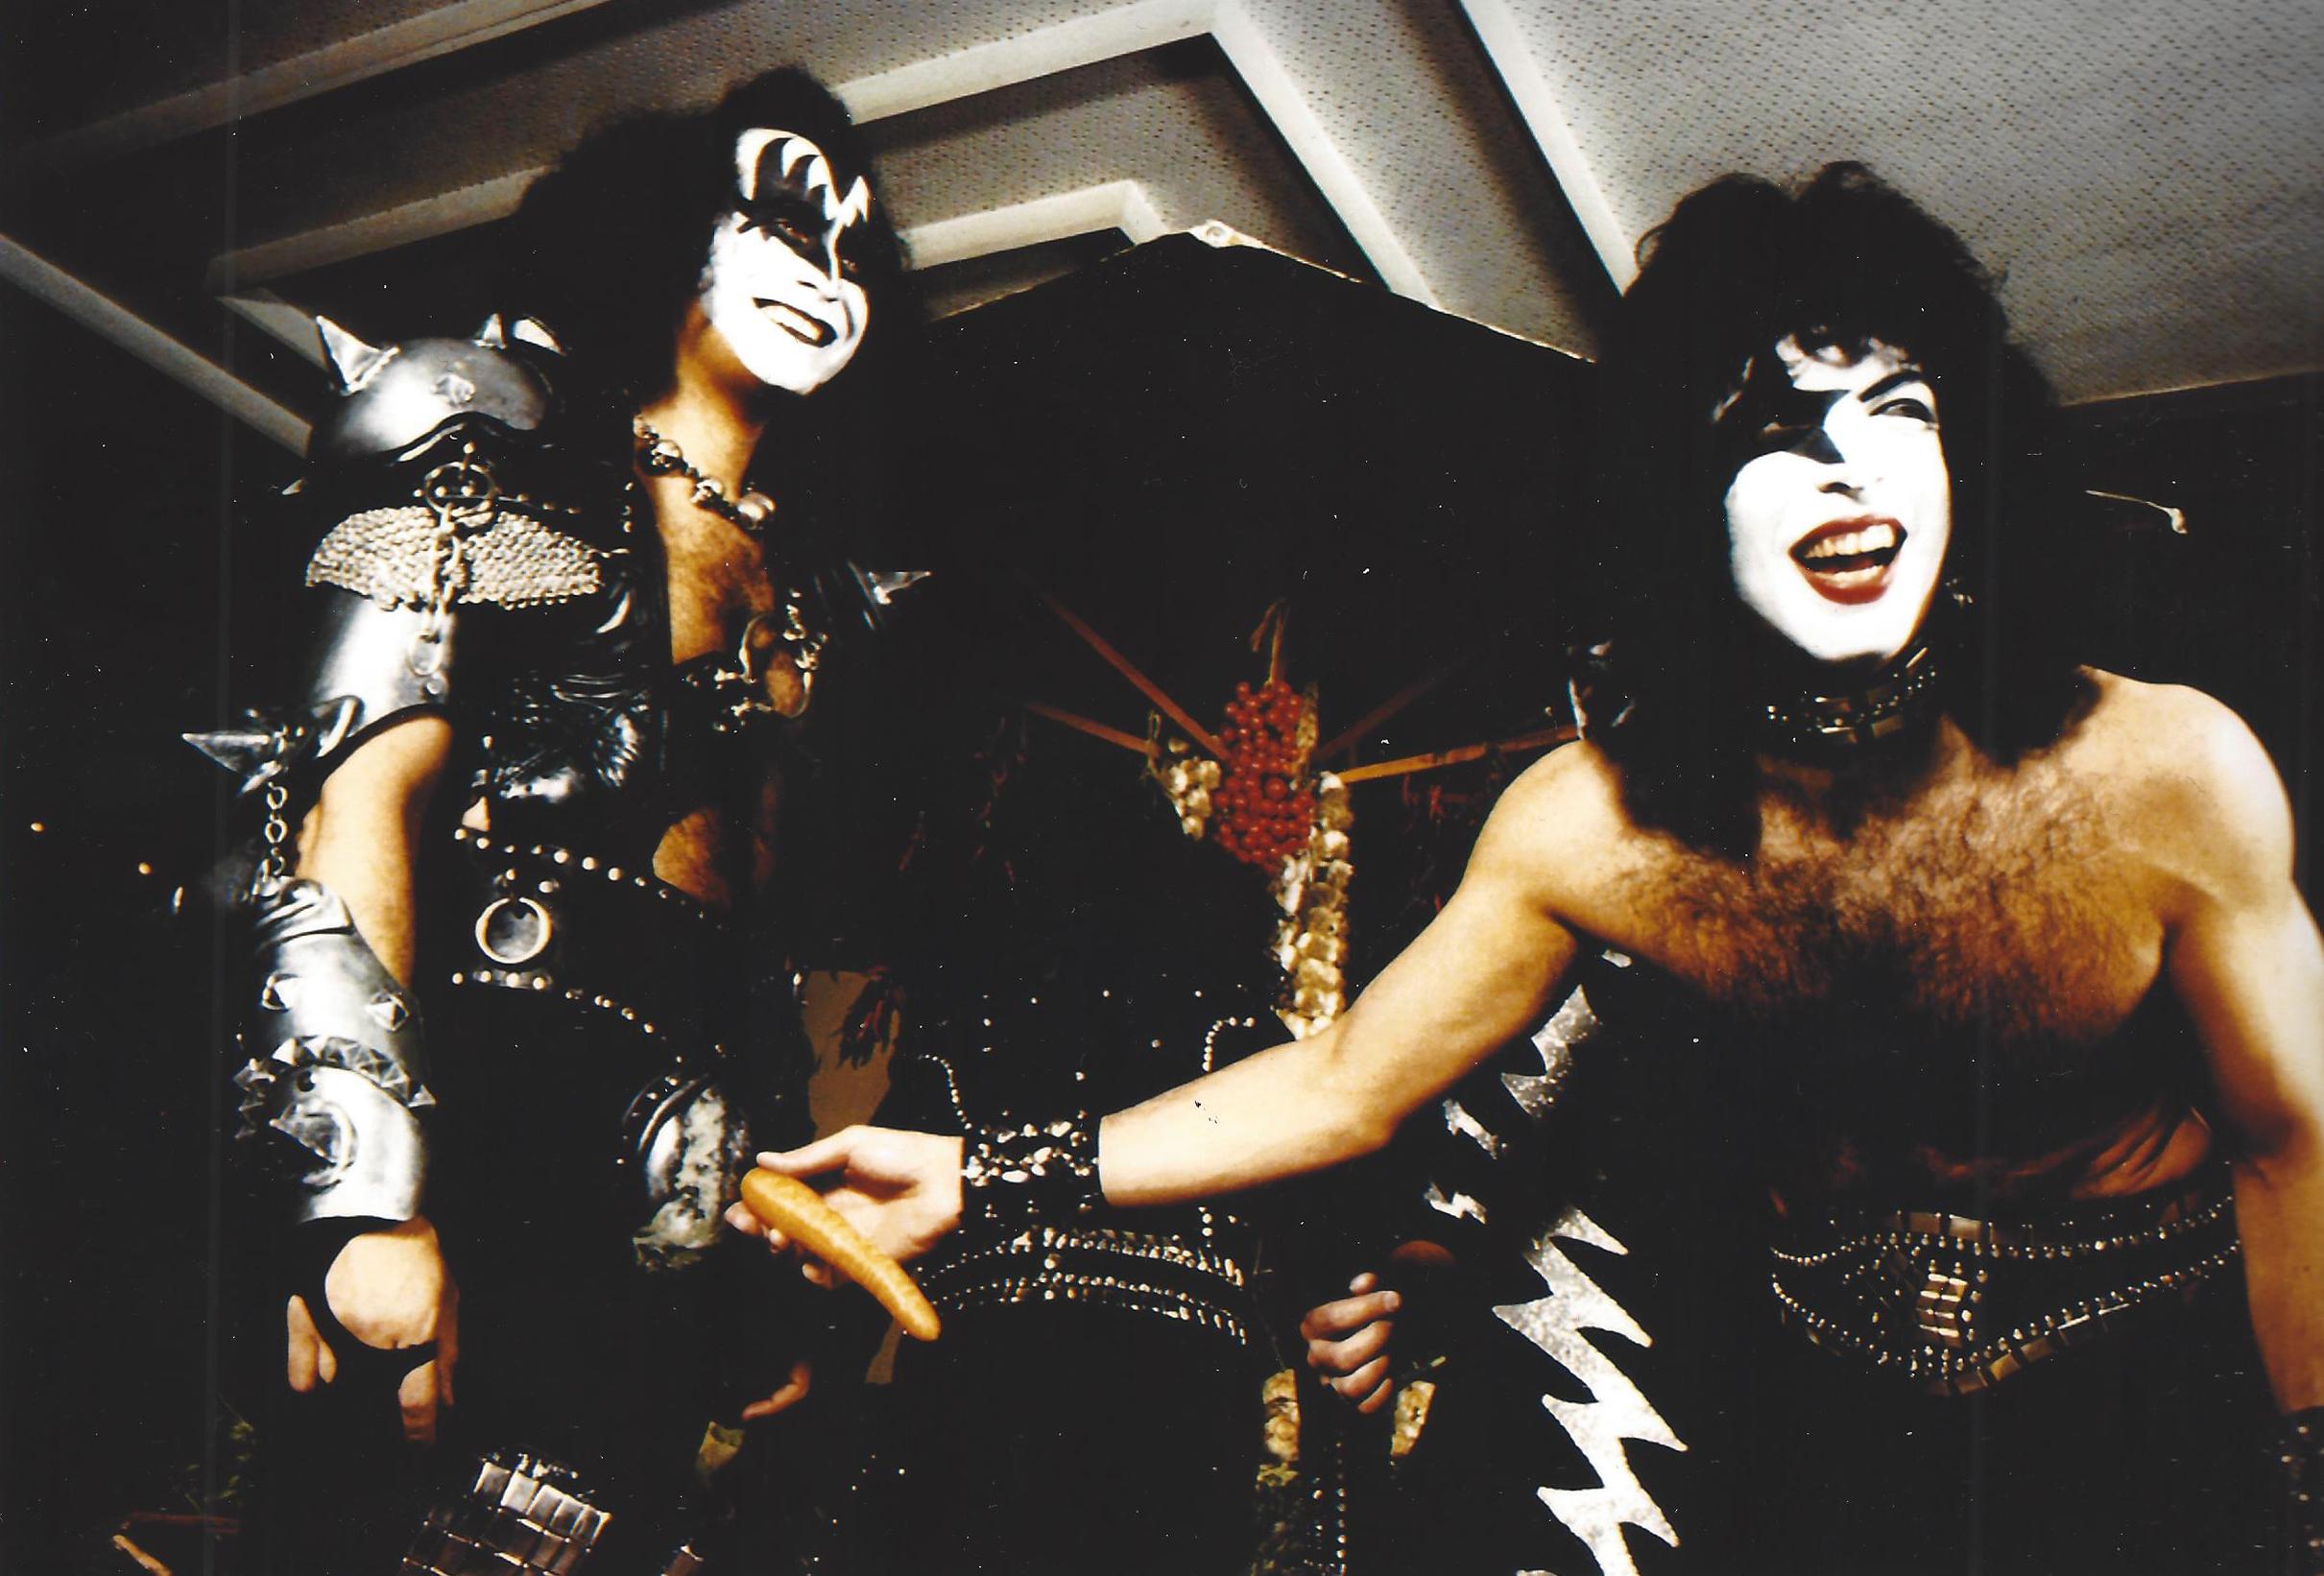 Luciano Viti Color Photograph - Ace Frehley and Gene Simmons of KISS Smiling Vintage Original Photograph